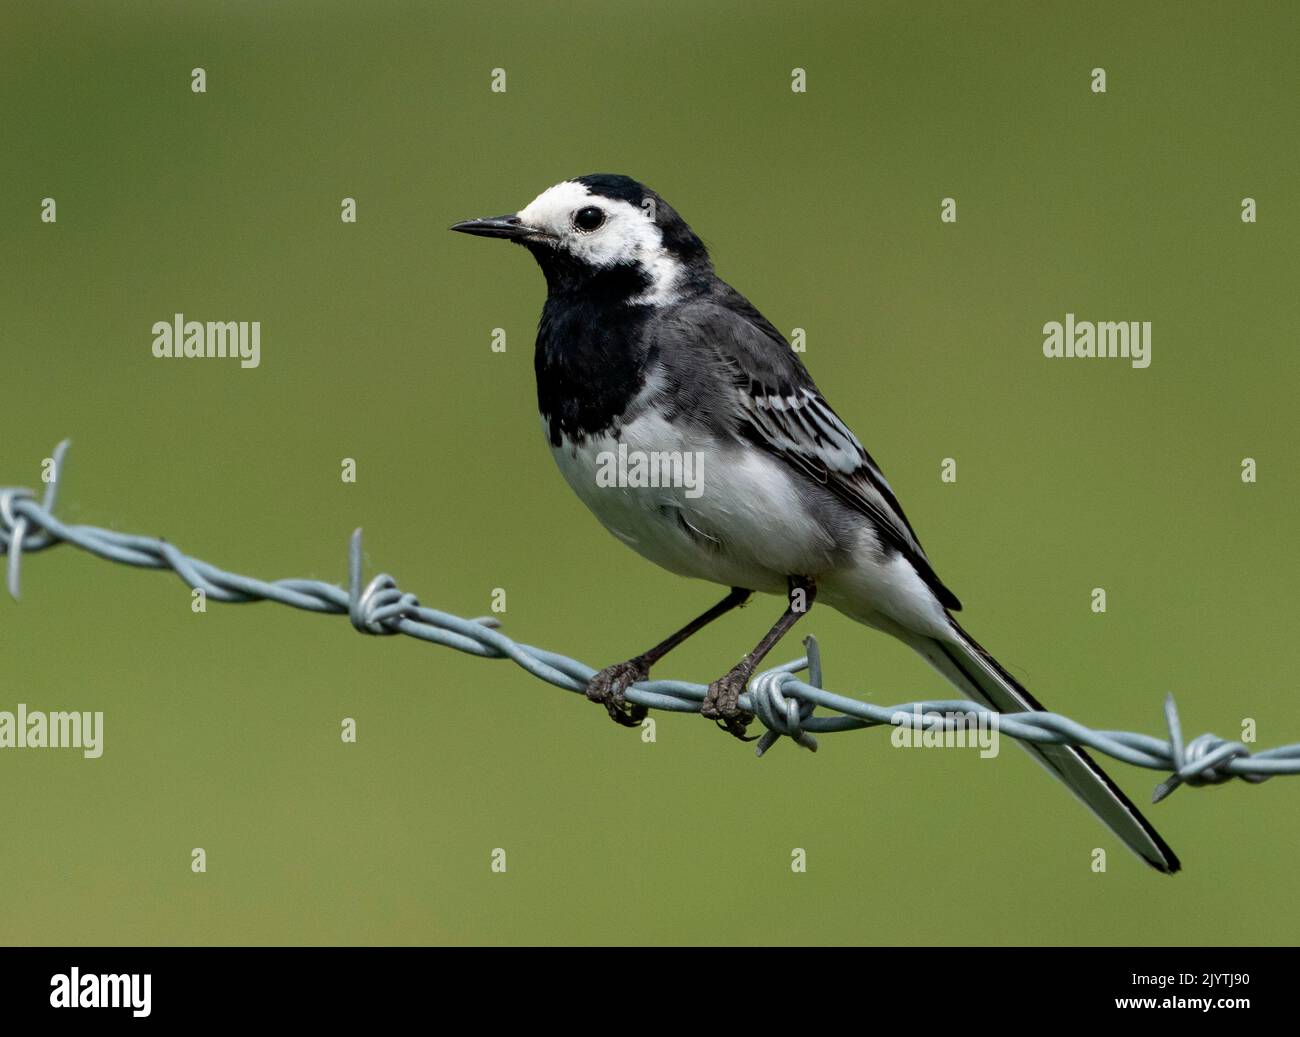 Pied wagtail (Motacilla alba) perched on a barbed wire, England Stock Photo